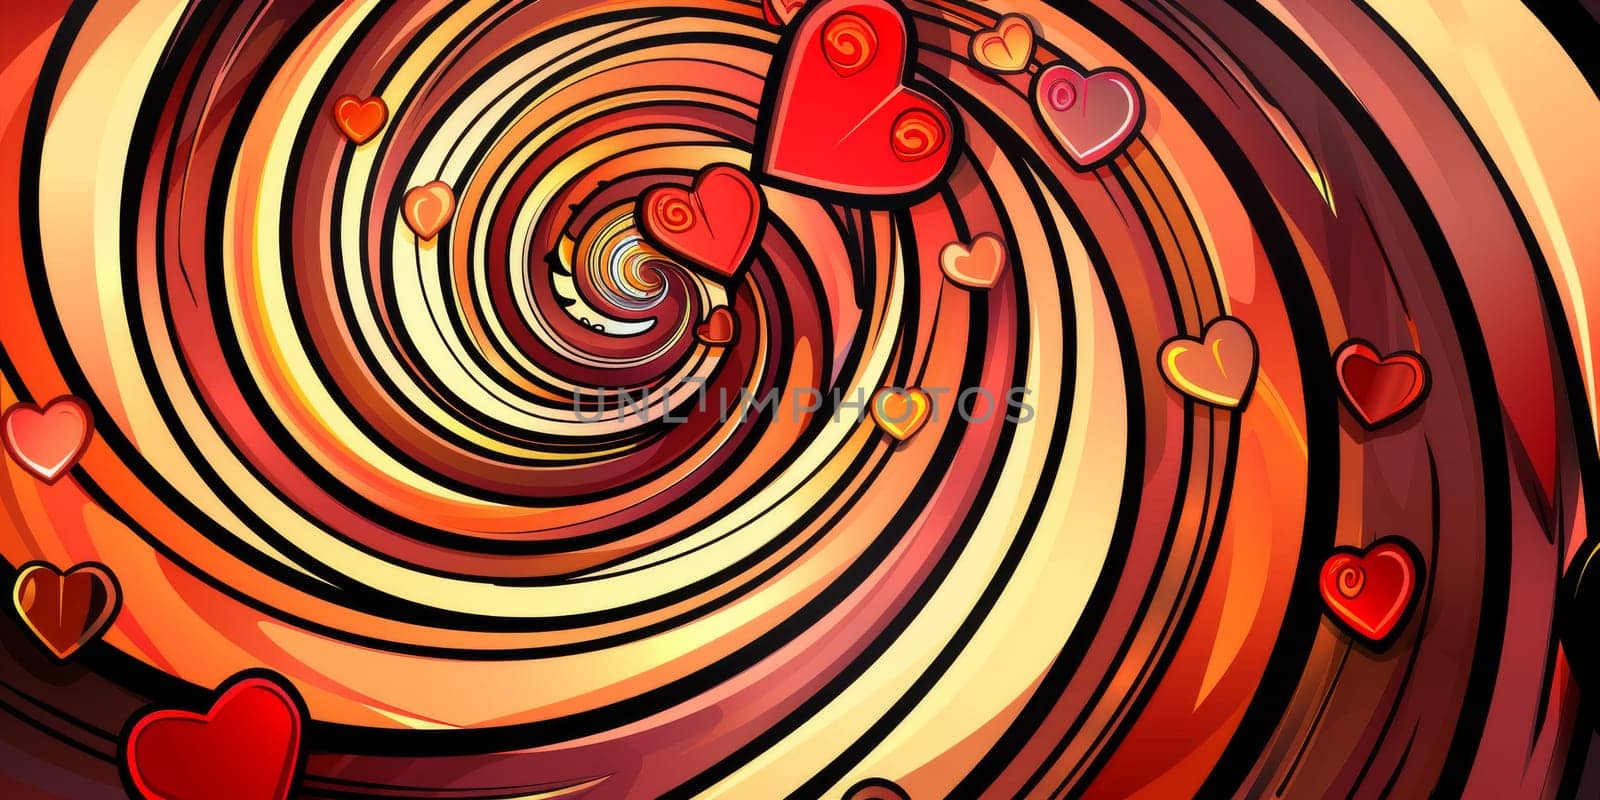 Warm color of spiral with love icons around, carousel of falling in love and falling in love again concept by Kadula